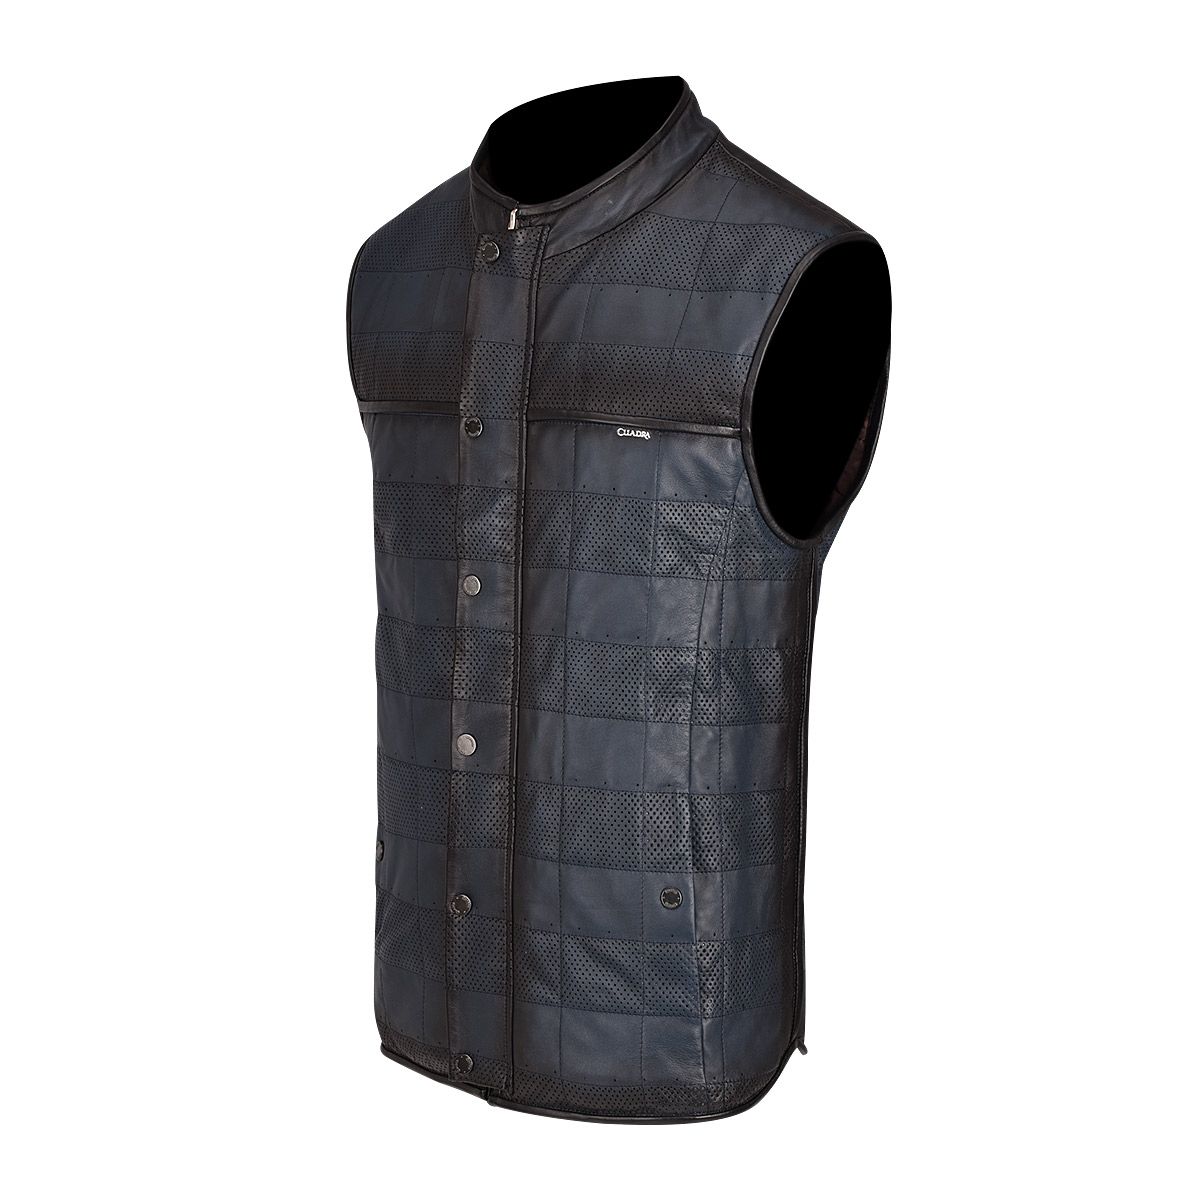 H303BOB - Cuadra blue casual fashion quilted cowhide leather racer vest for men-CUADRA-Kuet-Cuadra-Boots